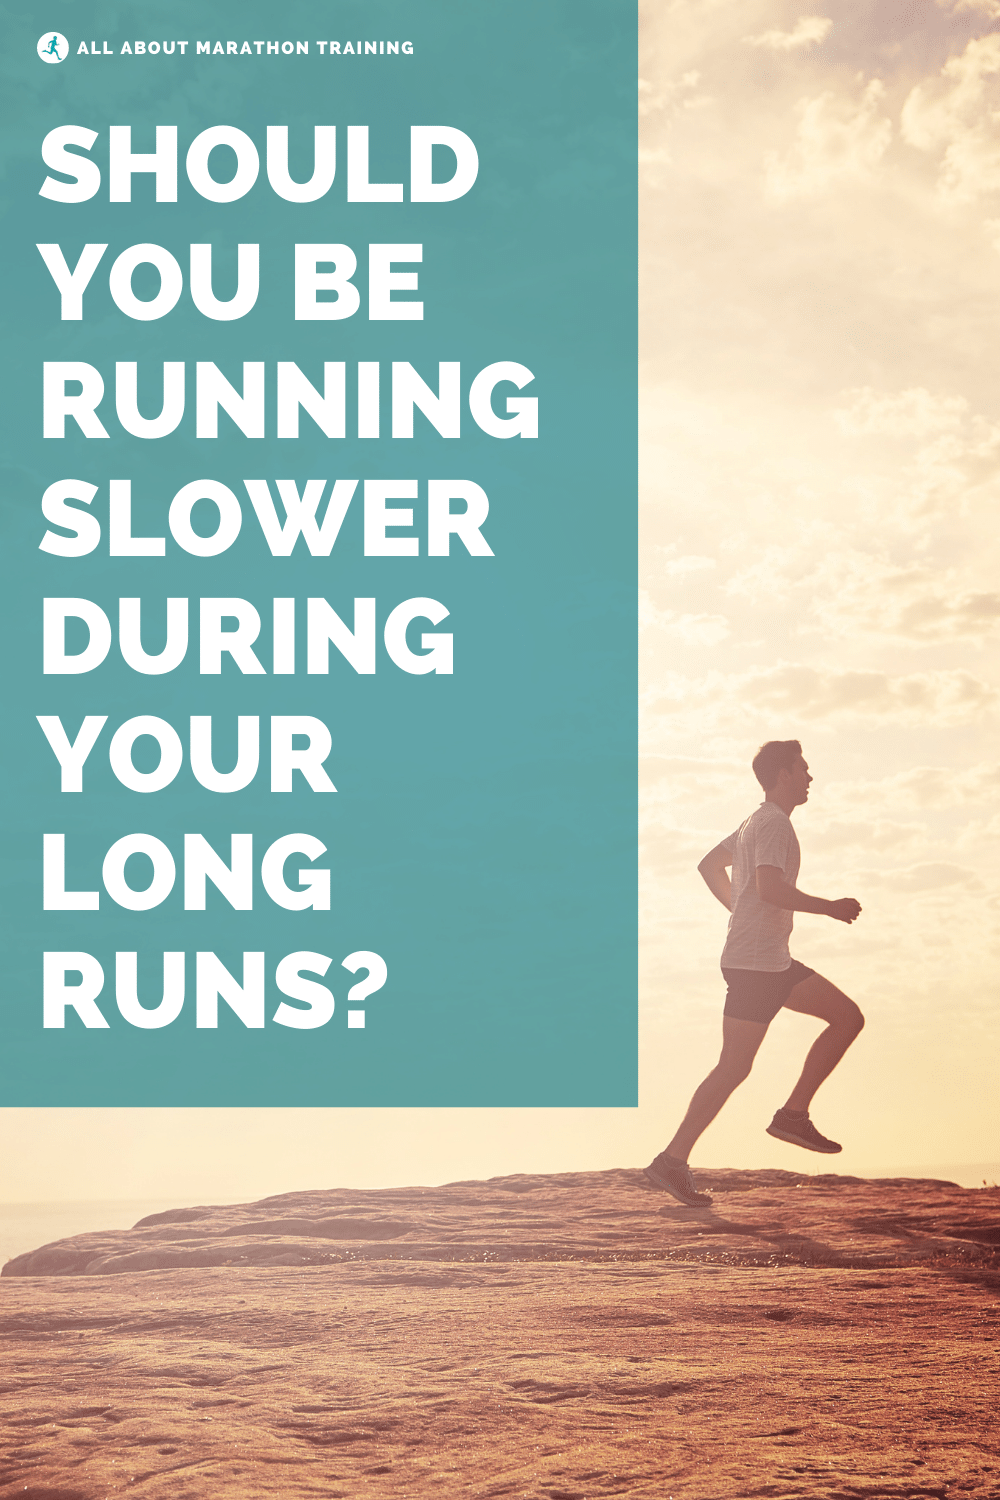 Long Run Pace: What should mine be?